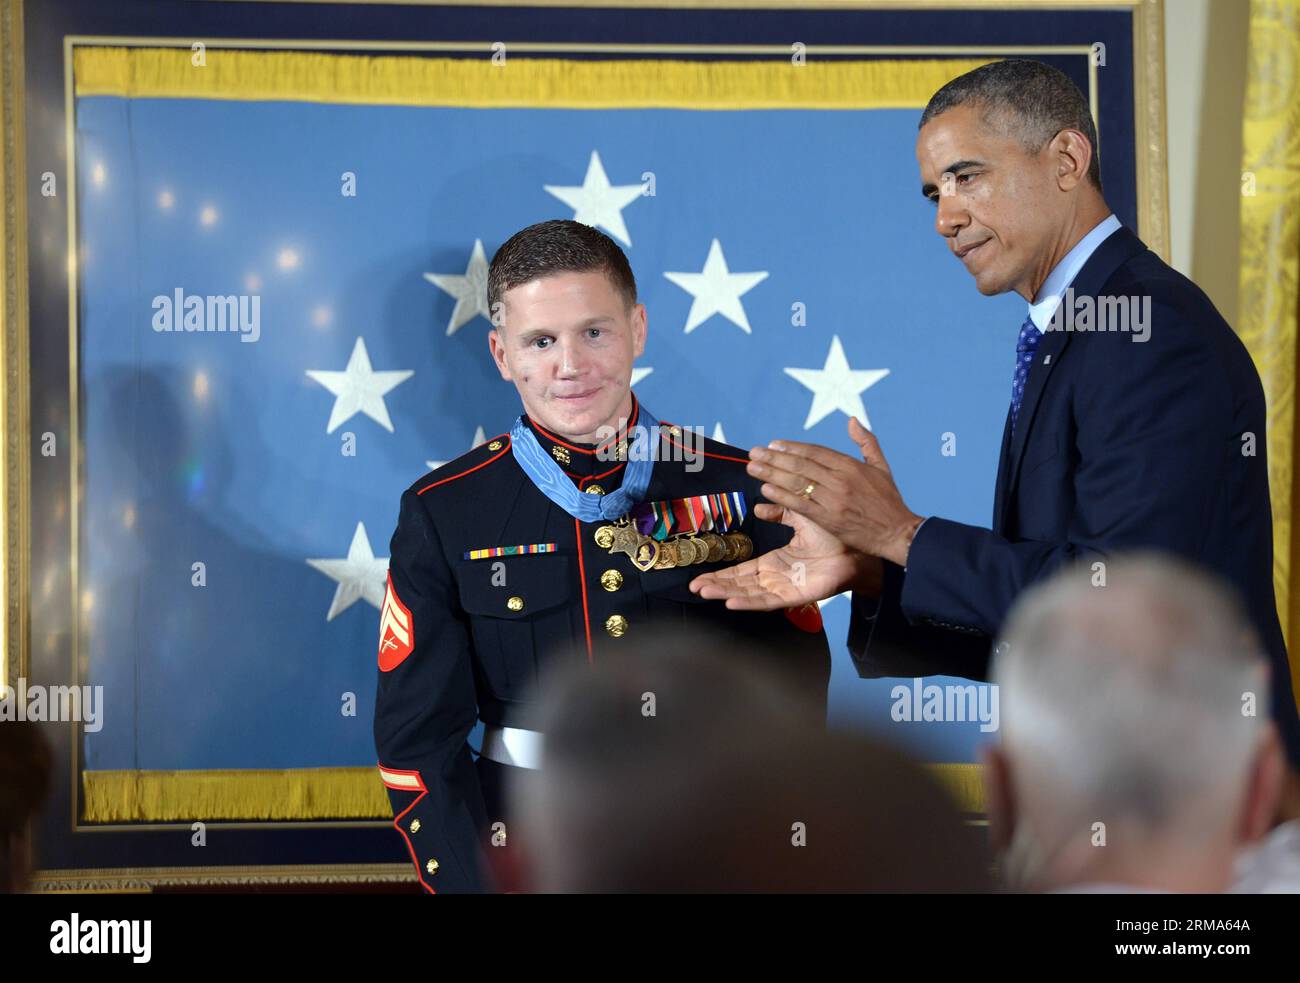 (140619) -- WASHINGTON D.C., June 19, 2014 (Xinhua) -- U.S. President Barack Obama (R) applauds at a ceremony after awarding William Kyle Carpenter (L) with the Medal of Honor in the East Room of the White House in Washington D.C., the United States, on June 19, 2014. Carpenter received the medal for covering a grenade to save fellow Marines during a Taliban attack in November 2010. Carpenter is the eighth living recipient chosen for the highest military award. (Xinhua/Yin Bogu) US-WASHINGTON D.C.-MEDAL OF HONOR-CARPENTER PUBLICATIONxNOTxINxCHN   Washington D C June 19 2014 XINHUA U S Presiden Stock Photo